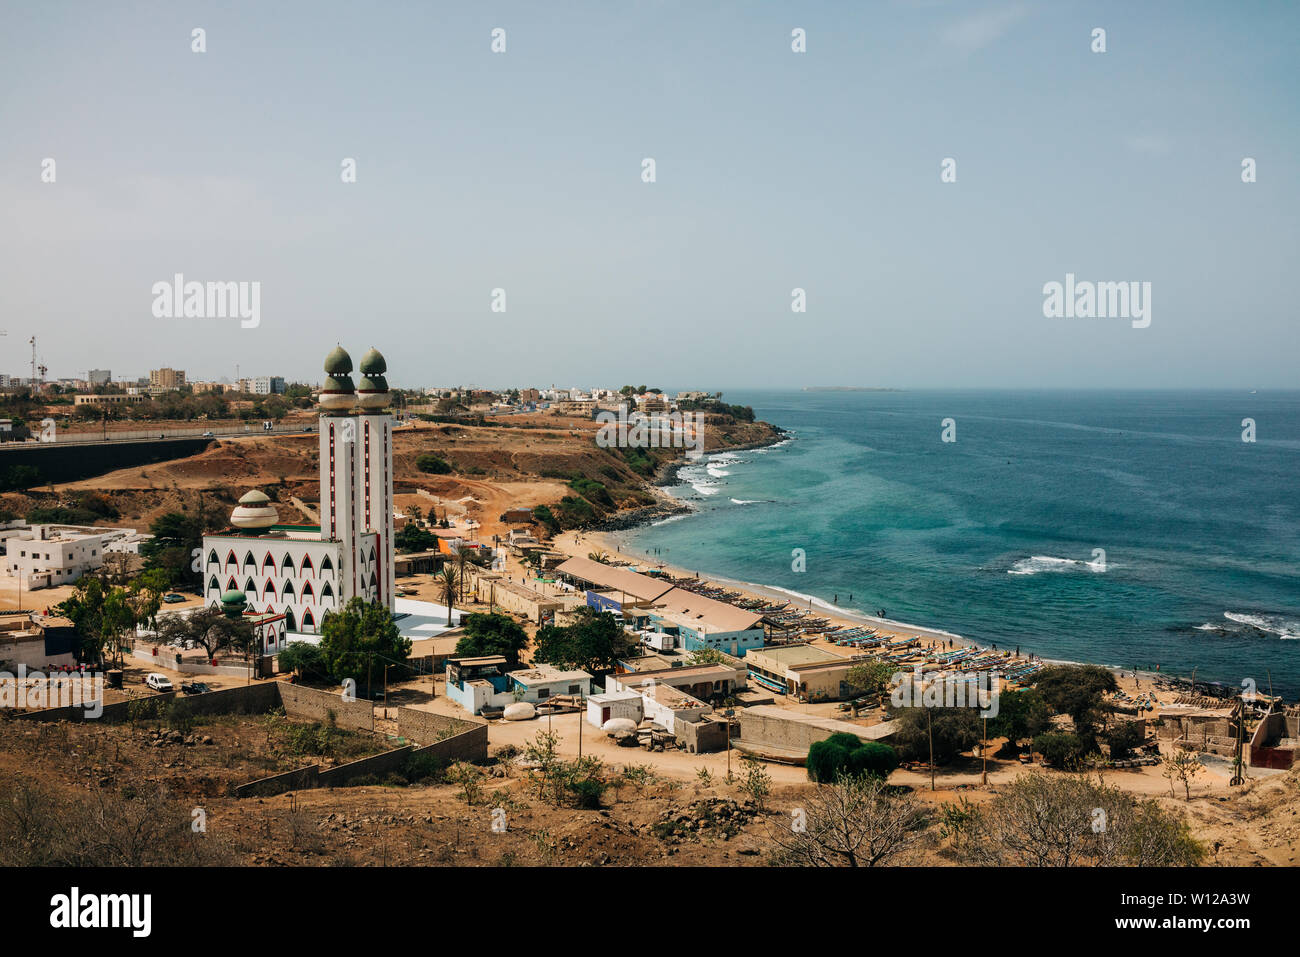 Coastline view of Dakar, Senegal with Mosque of the Divinity Stock Photo